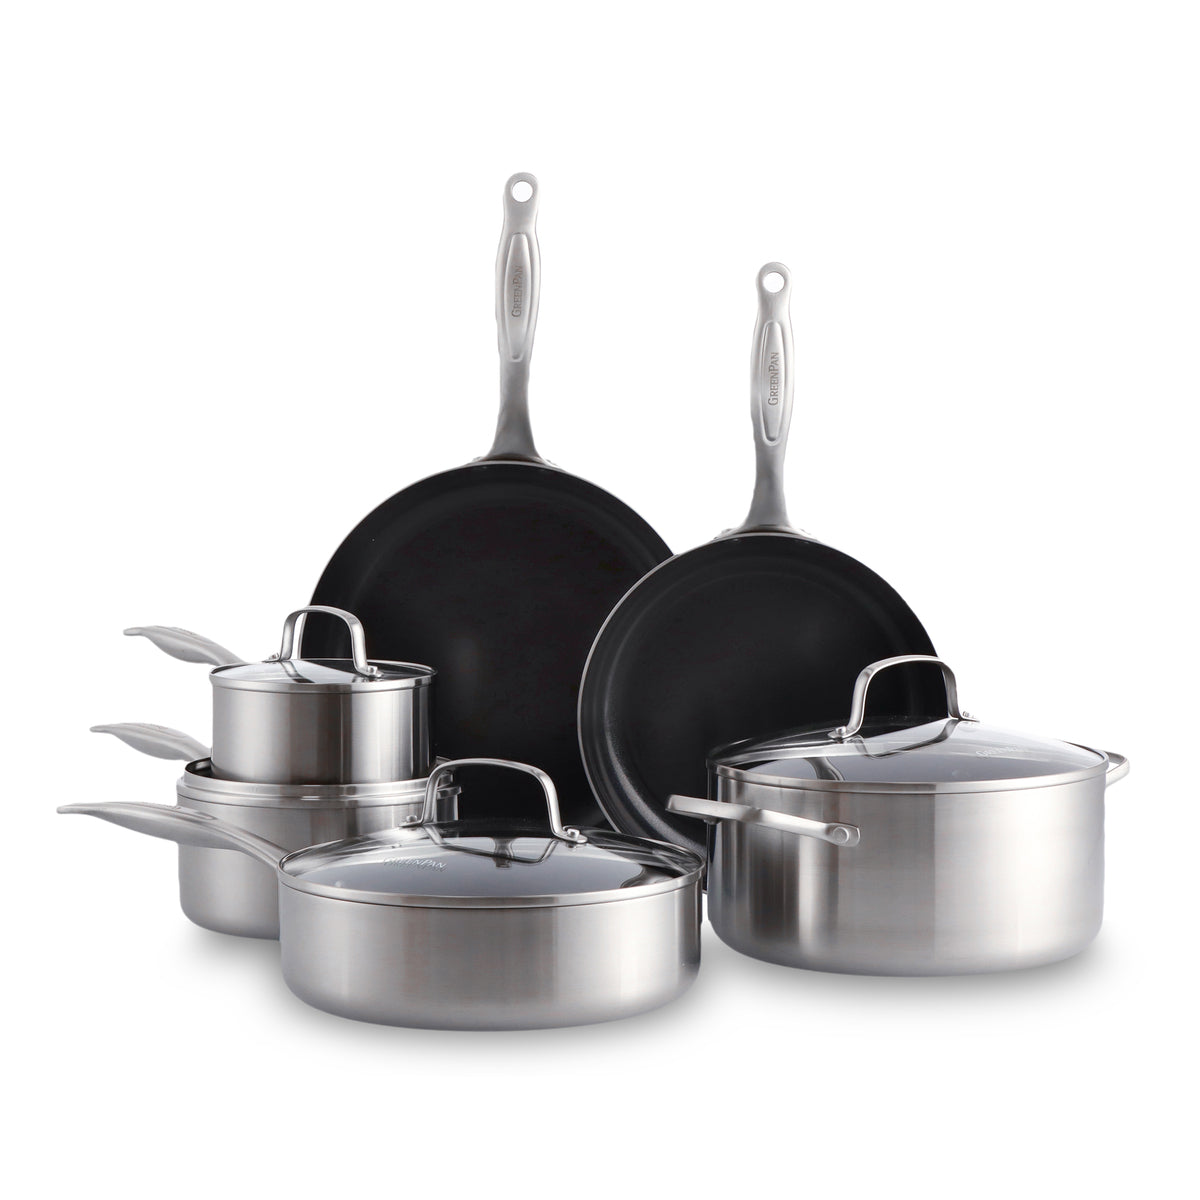 3-Ply Stainless Clad Pro 10pc Ceramic Nonstick Cookware Set